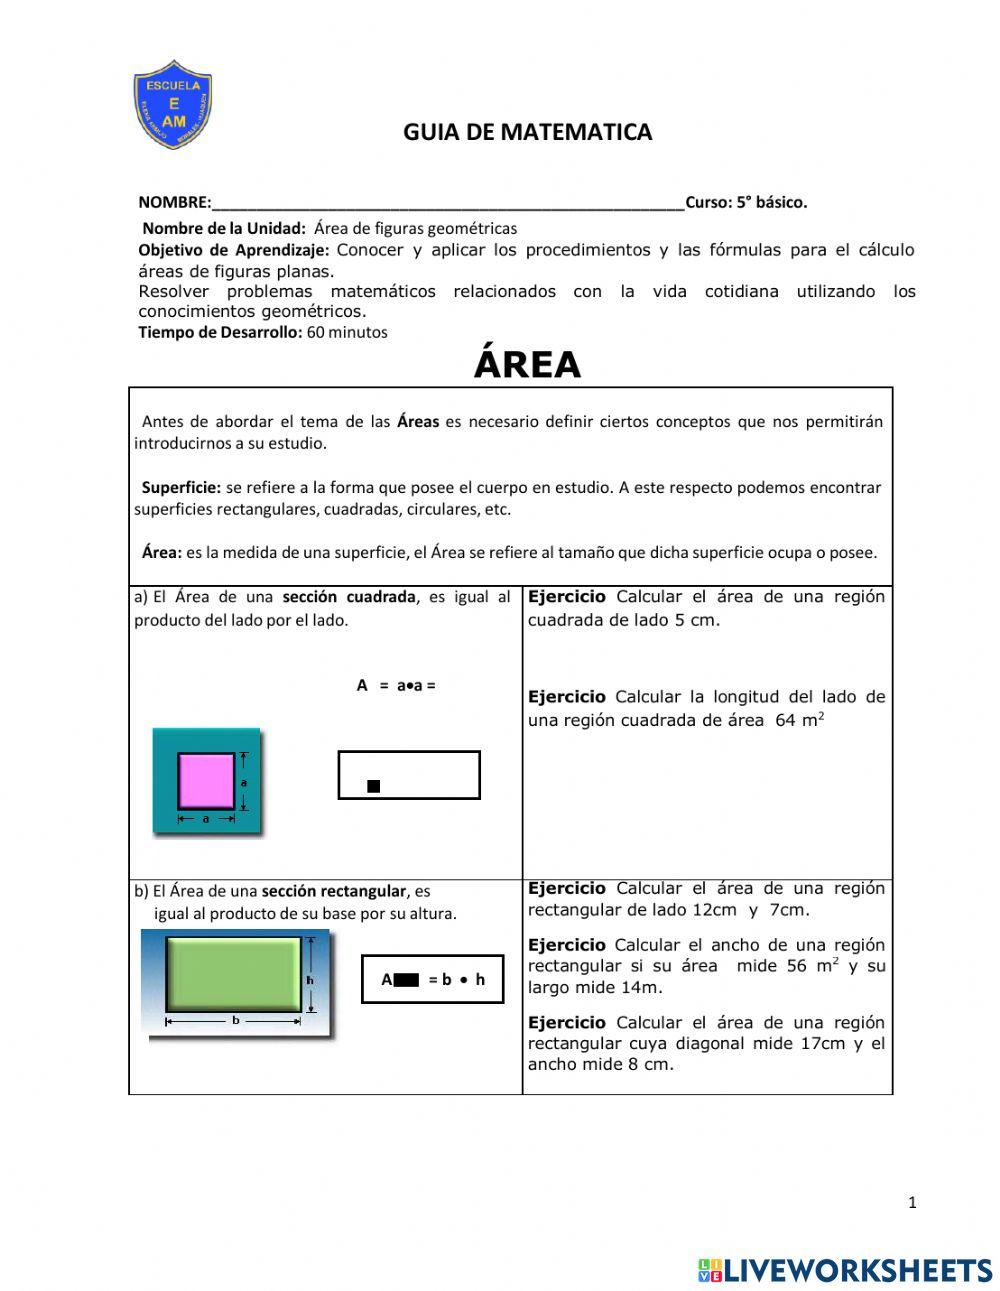 Area interactive exercise for 5 | Live Worksheets